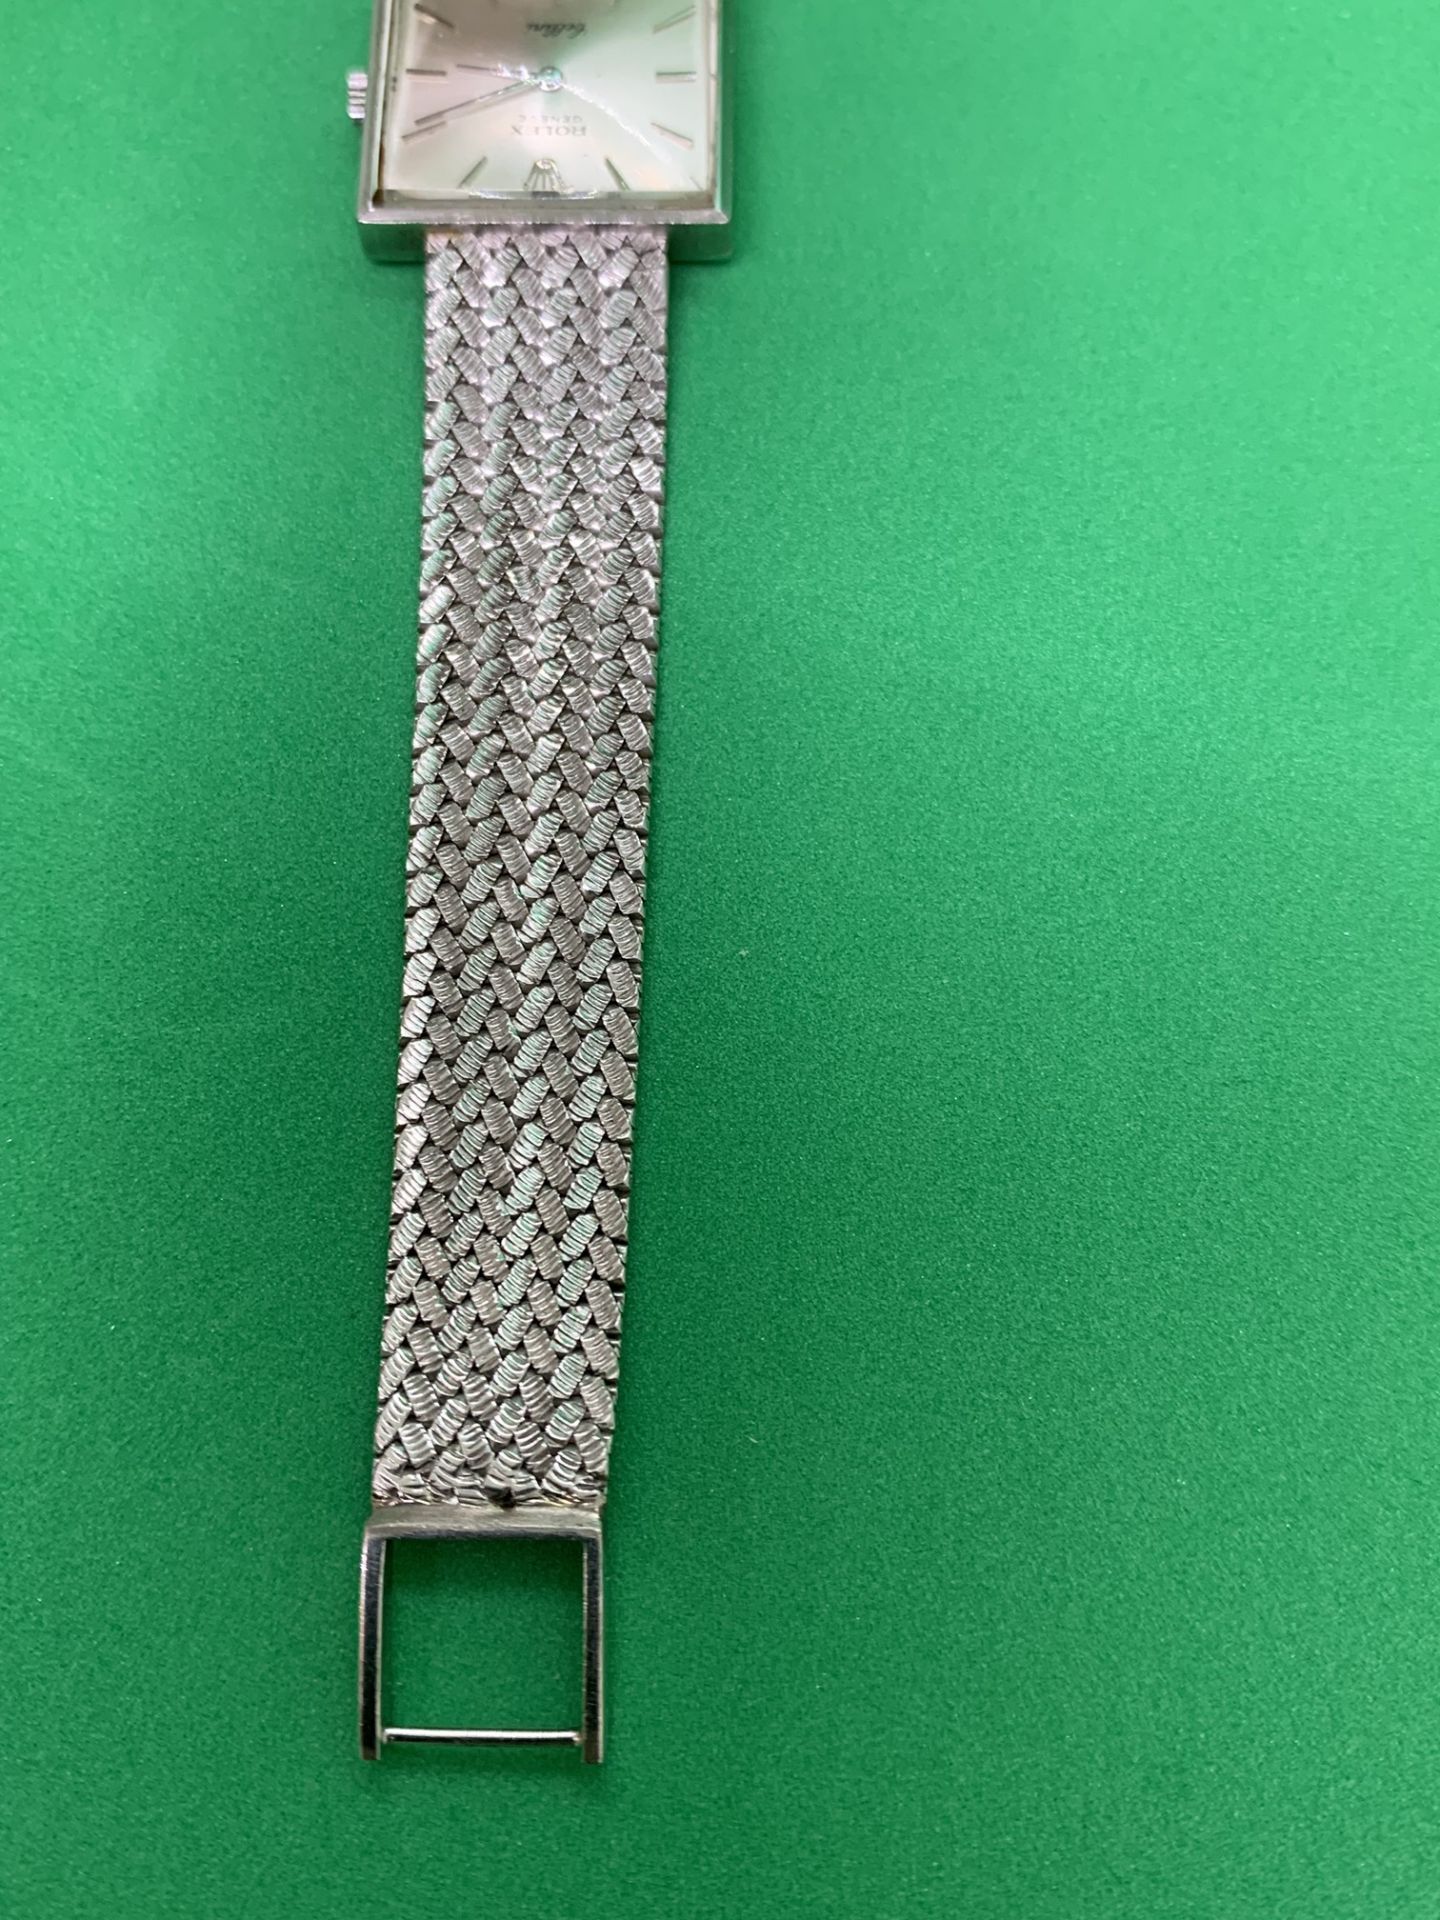 18ct WHITE GOLD ROLEX CELLINI WATCH - Image 8 of 9